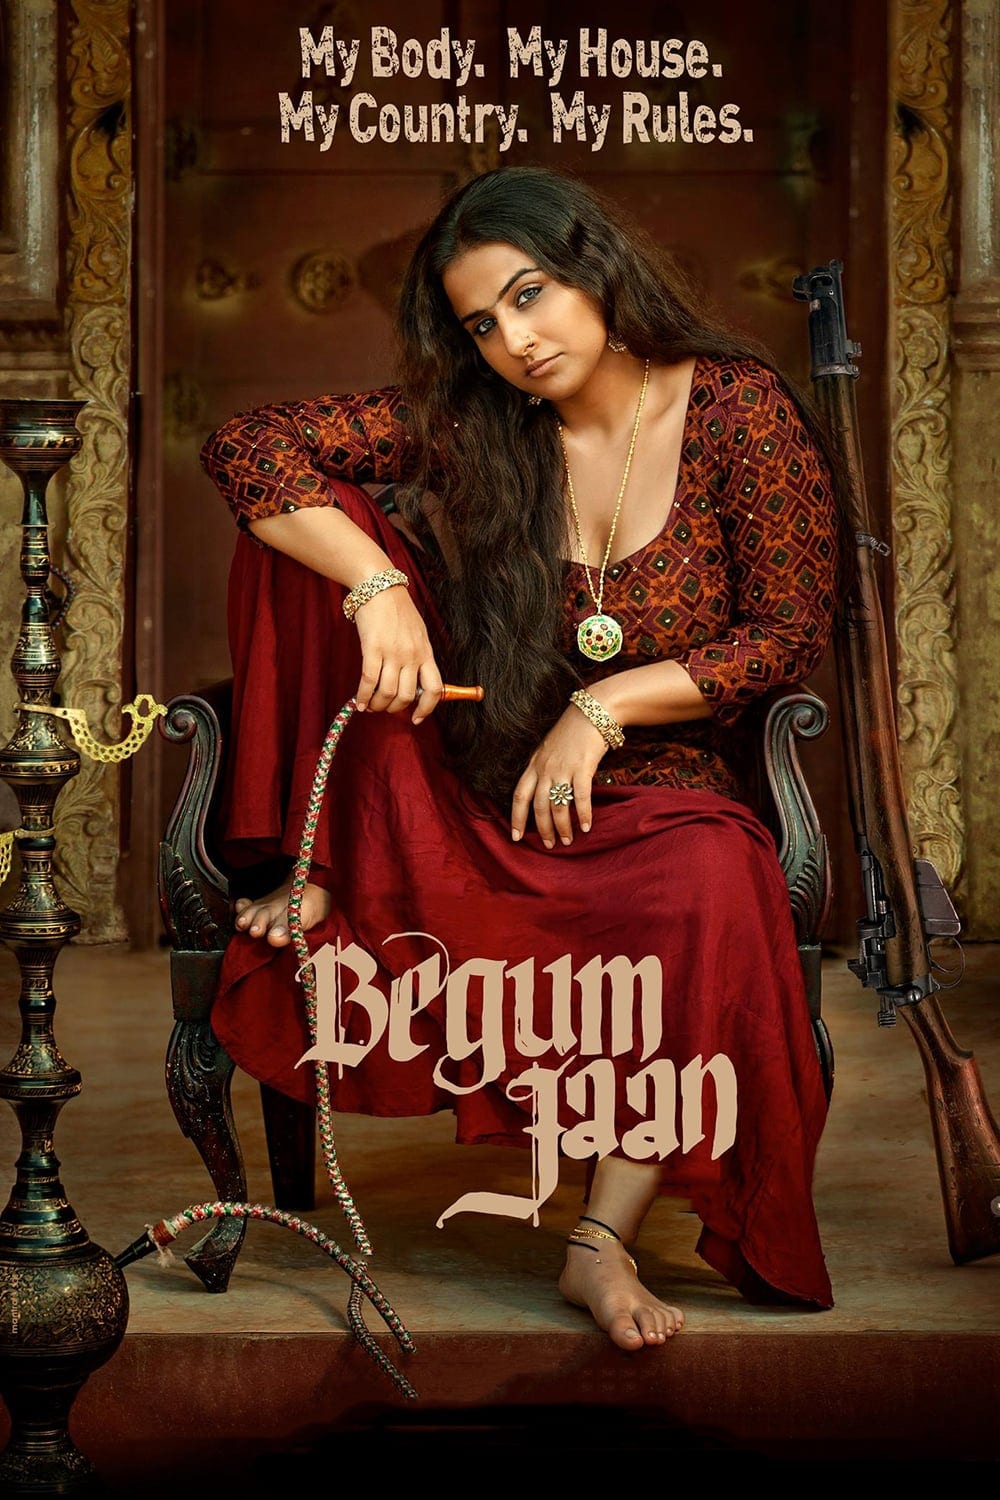 Poster for the movie "Begum Jaan"